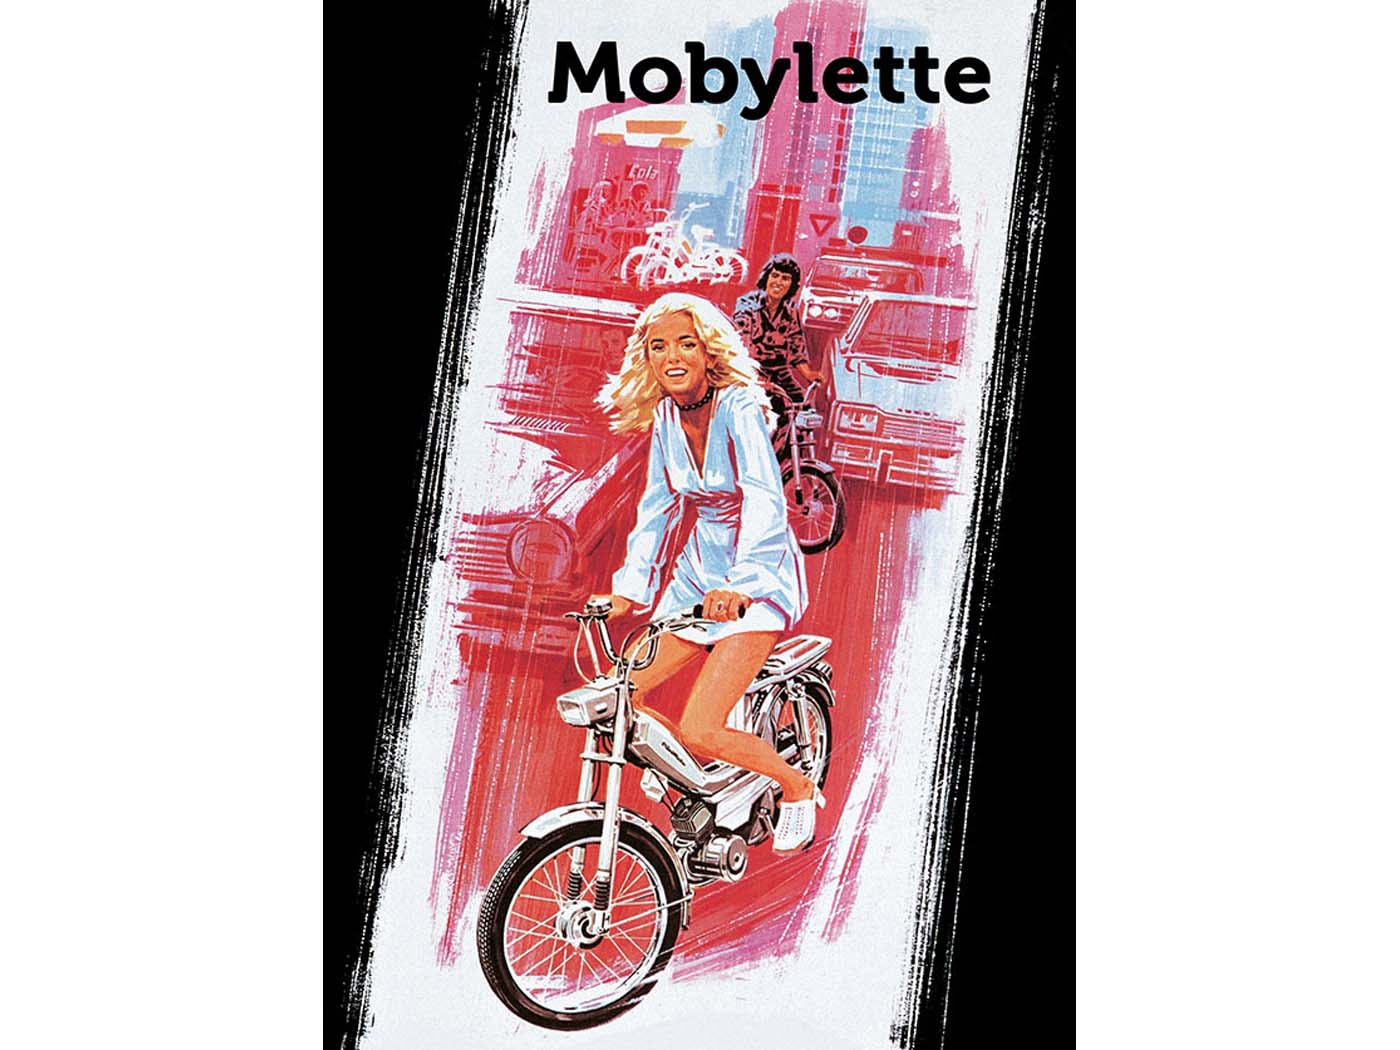 Motobecane, Mobylette, Mini Moby, Advertising Poster, 70s